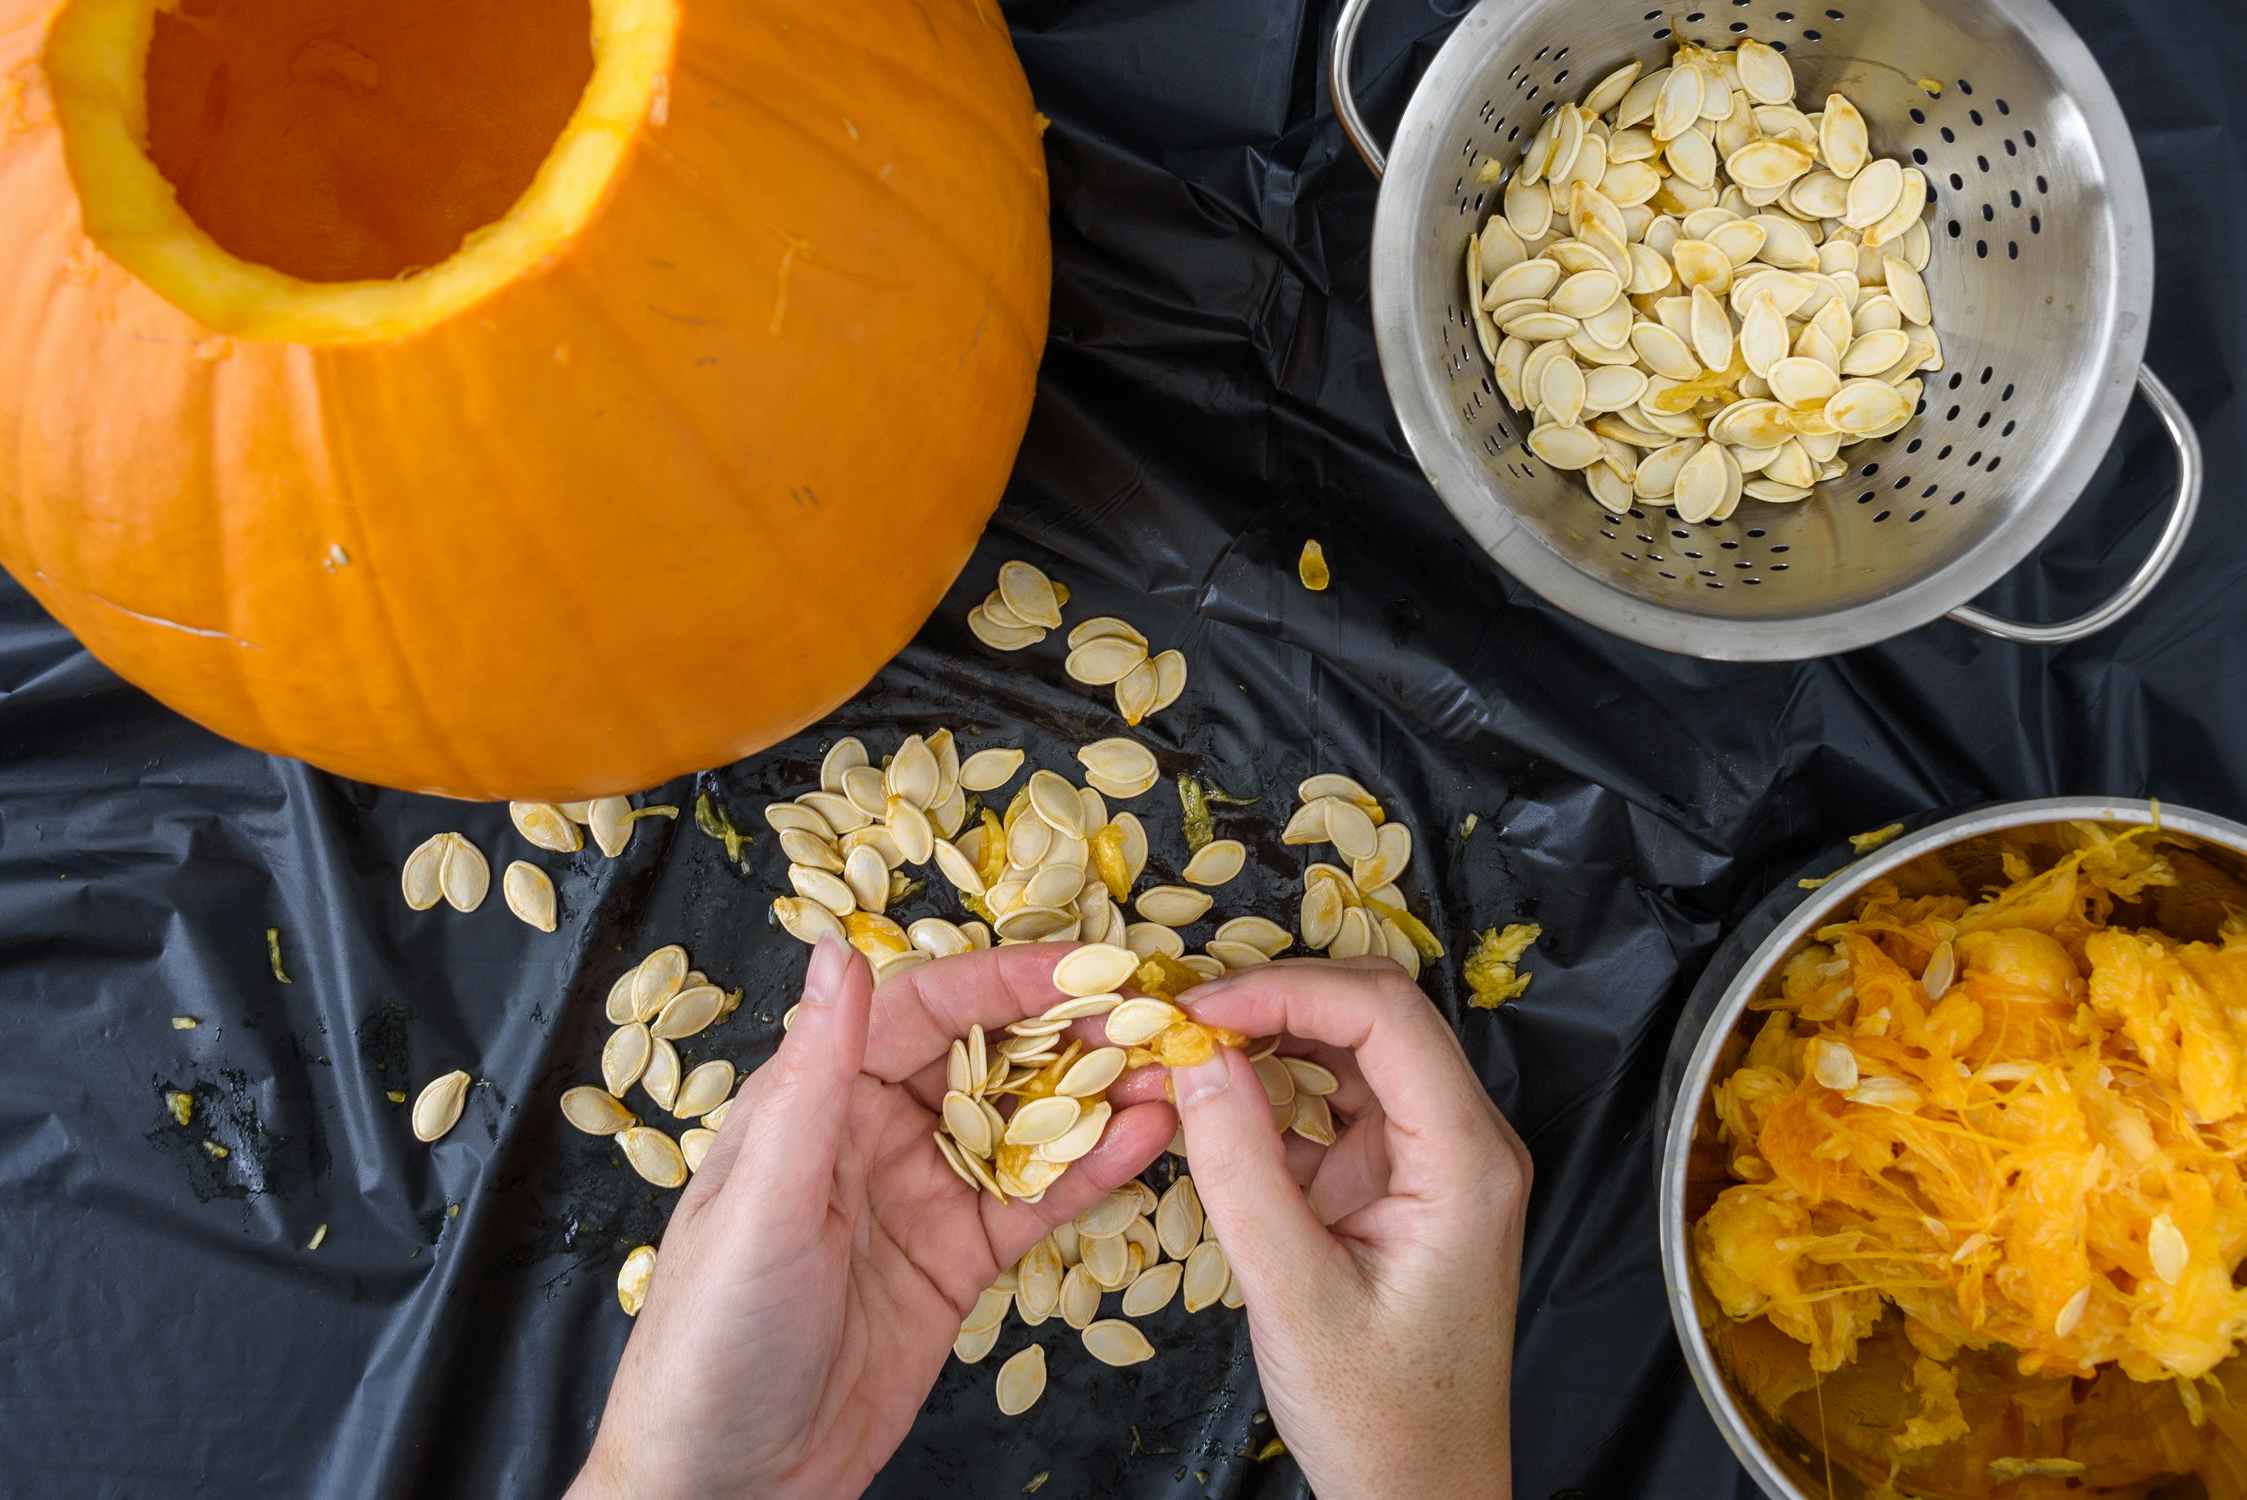 woman separating seeds from carved pumpkin flesh